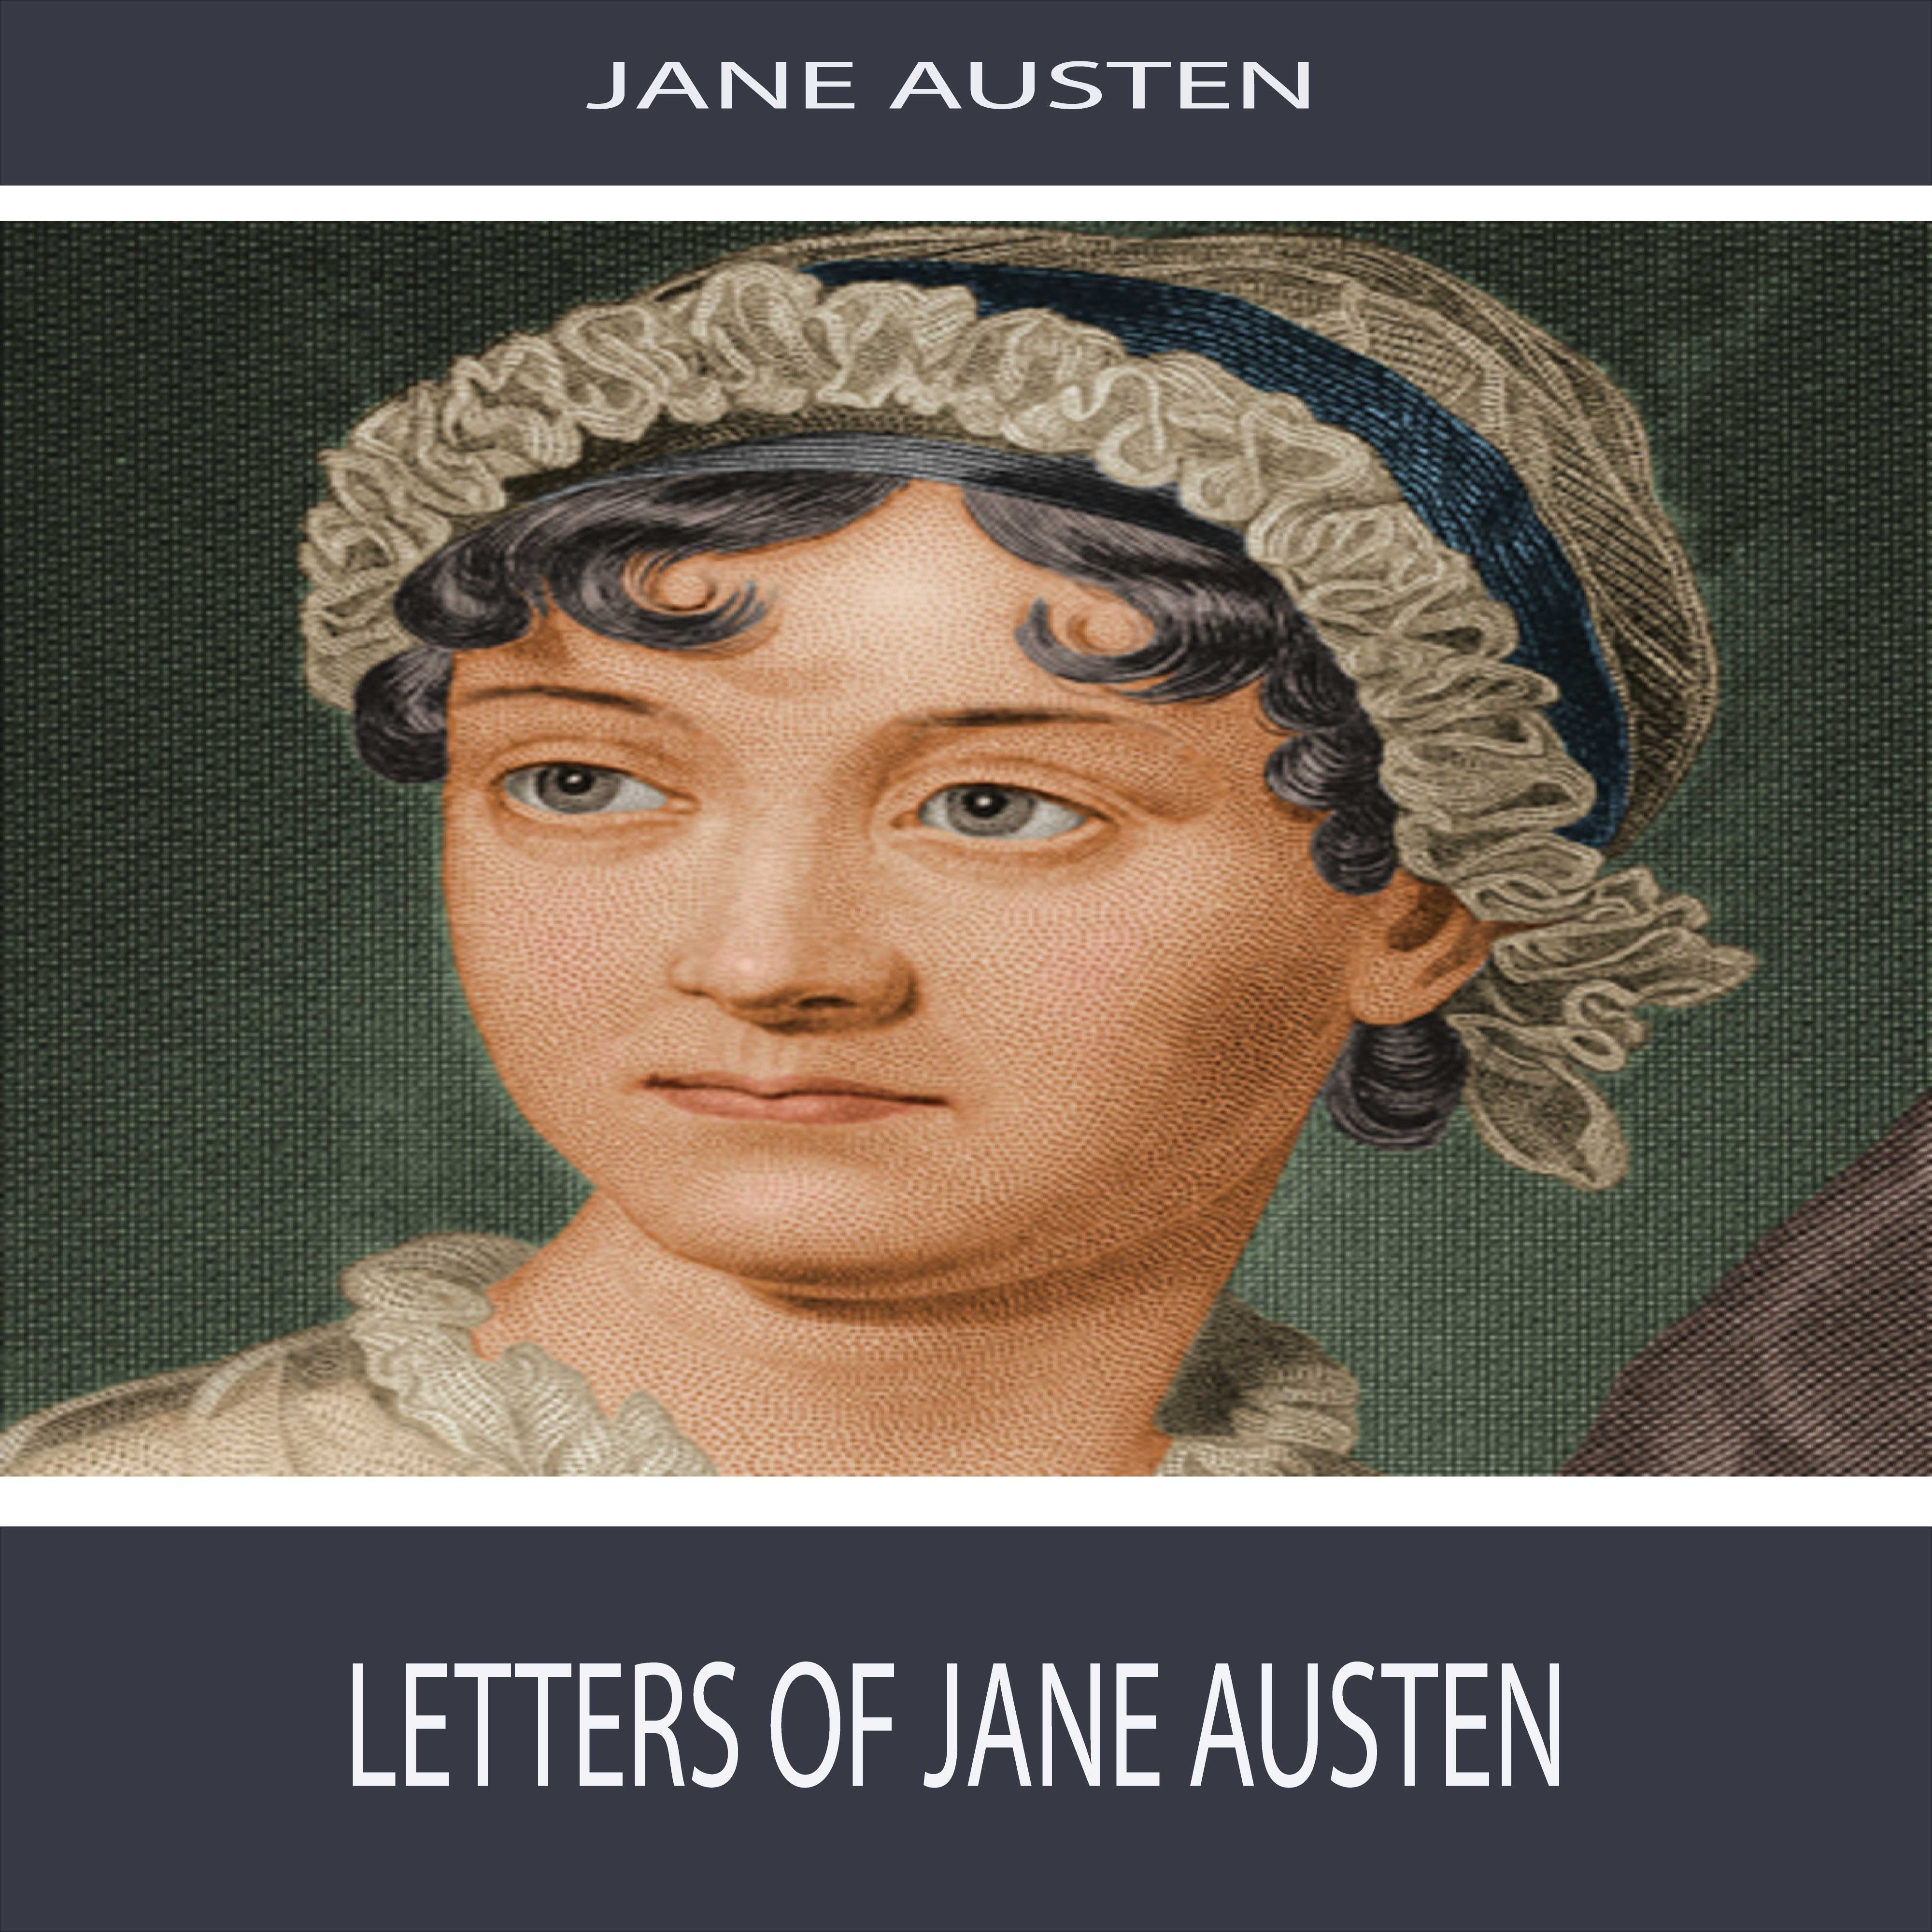 Letters of Jane Austen: Section 27